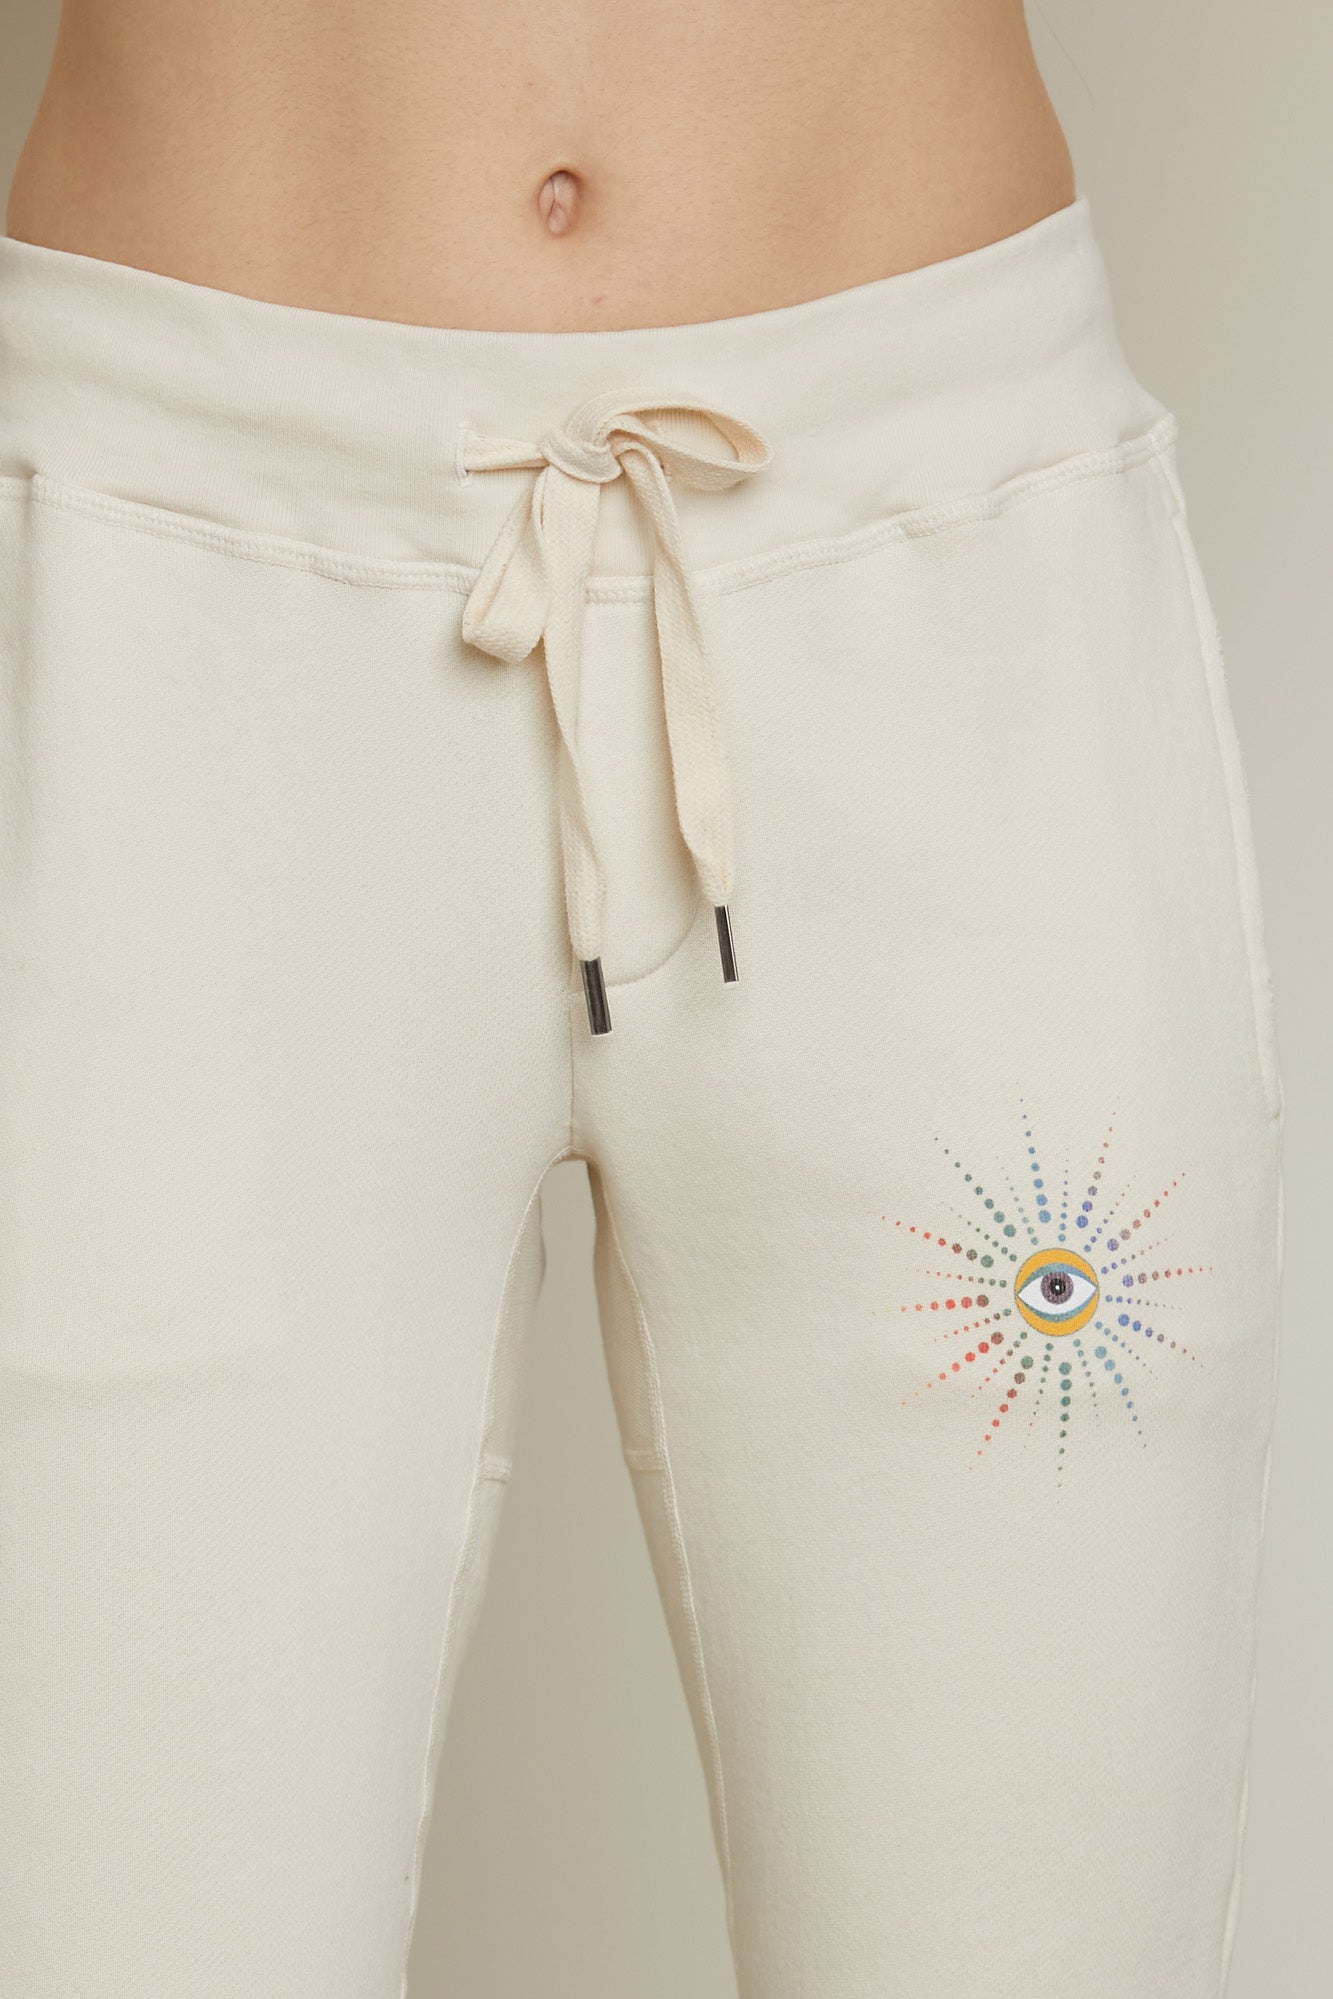 NSF x Jacquie Aiche Sayde Sweatpant, Eye Candy, View 6 cord